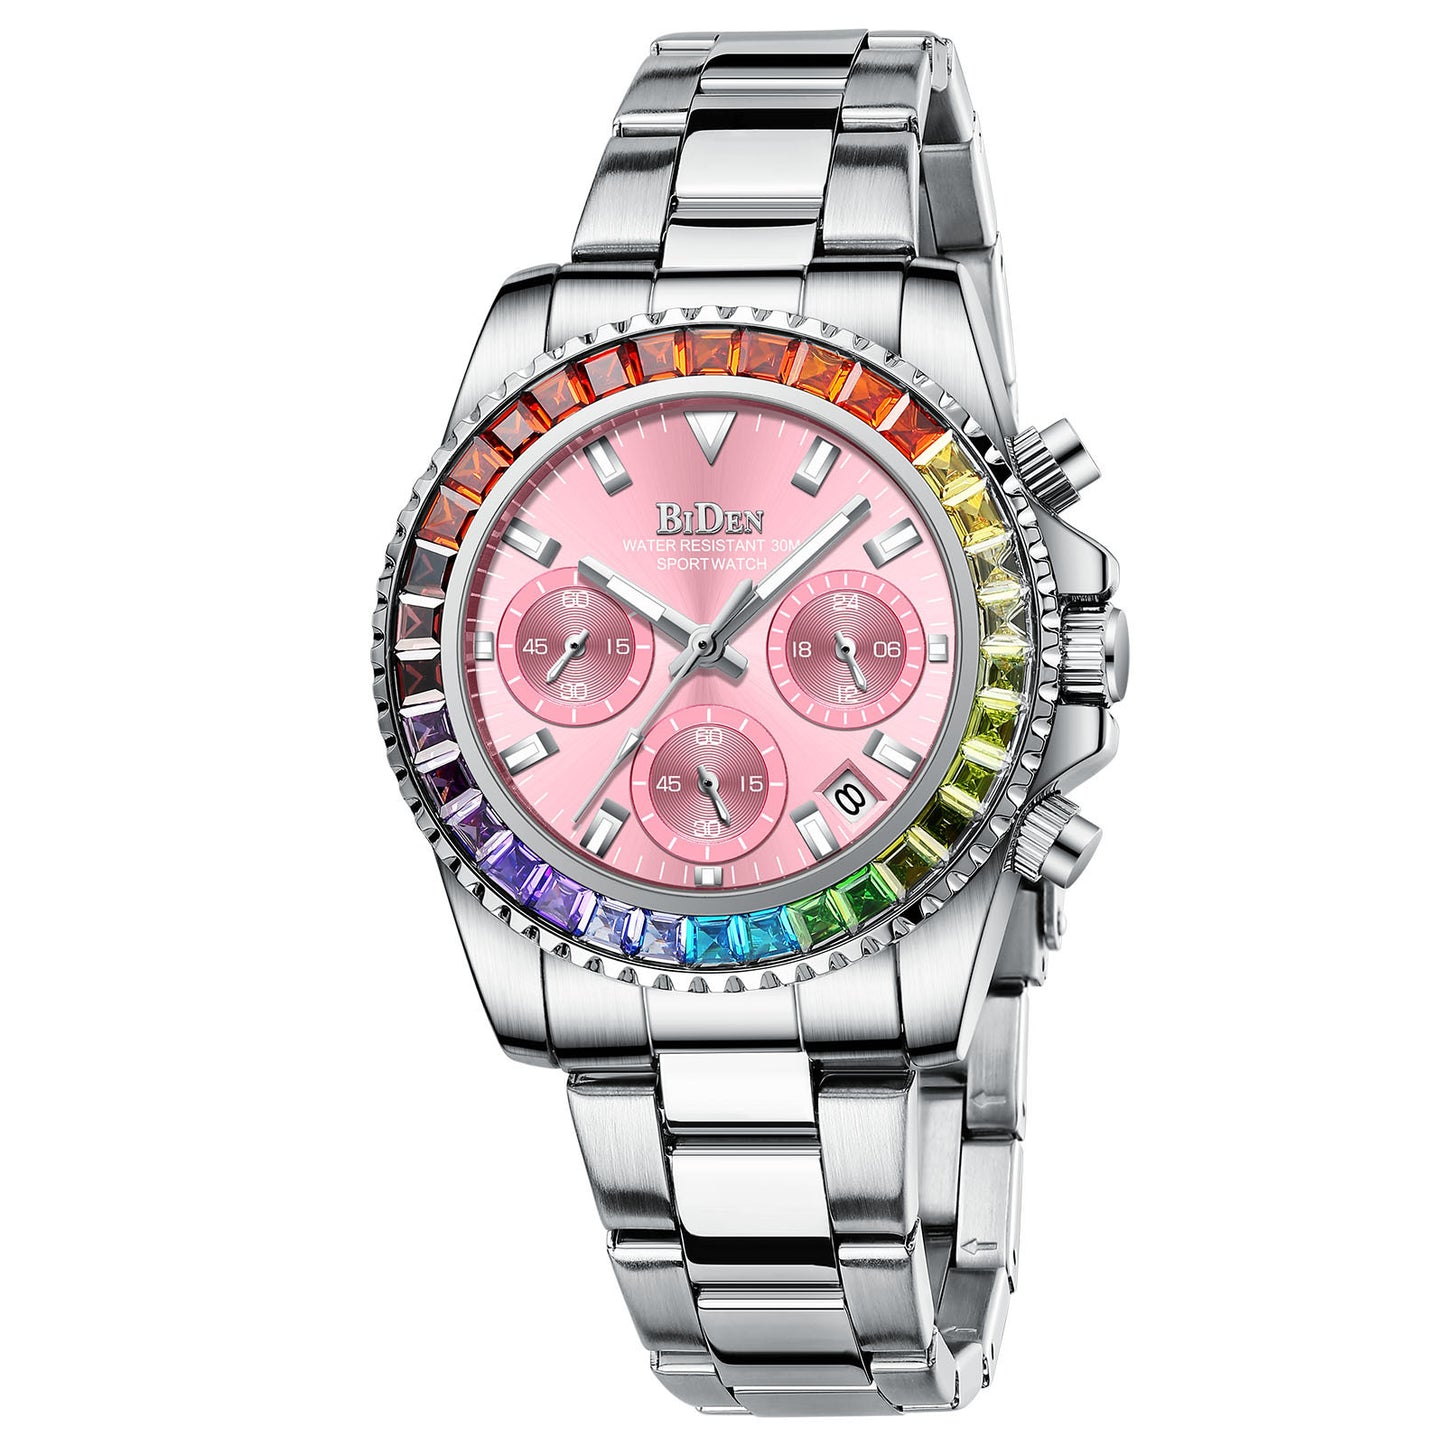 Trendy Business Ladies' Diamond Watch with Fashionable Steel Band and Colored Accents